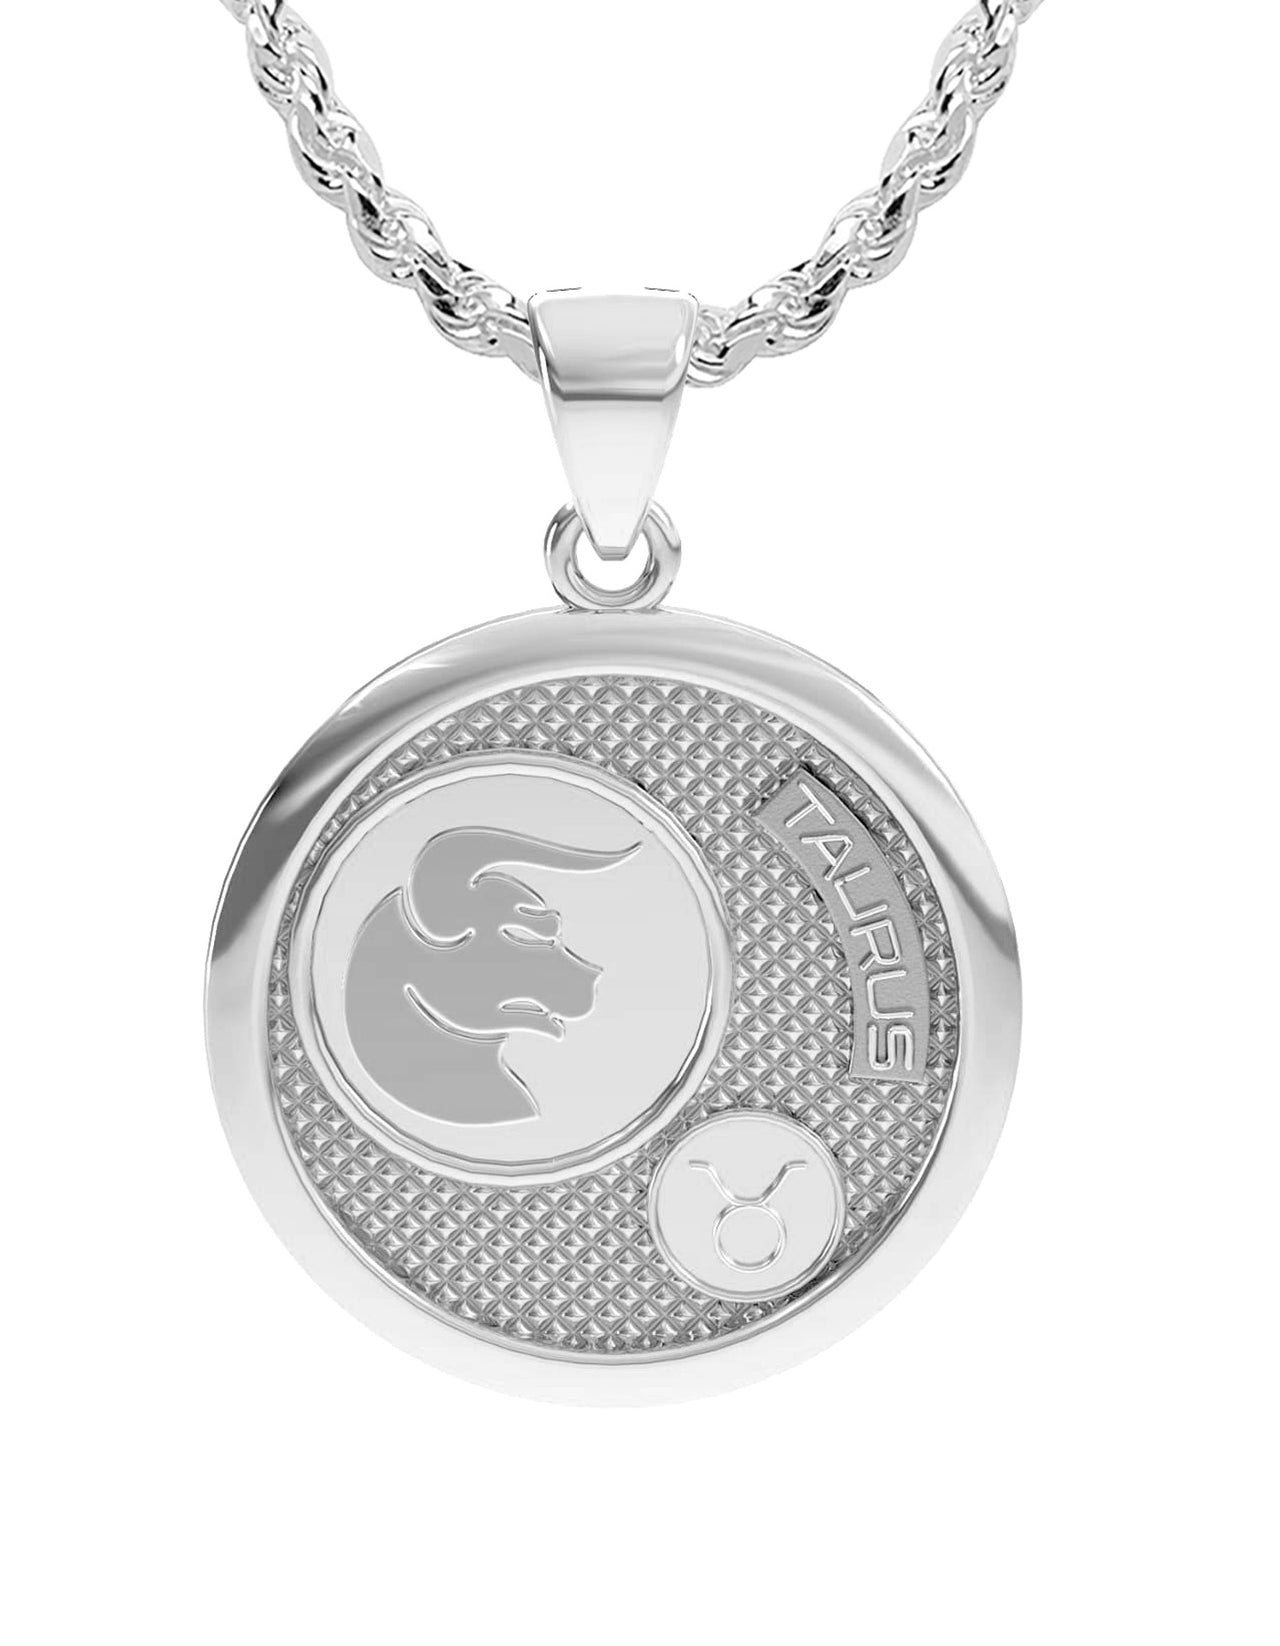 Ladies 925 Sterling Silver Round Taurus Zodiac Polished Finish Pendant Necklace, 25mm